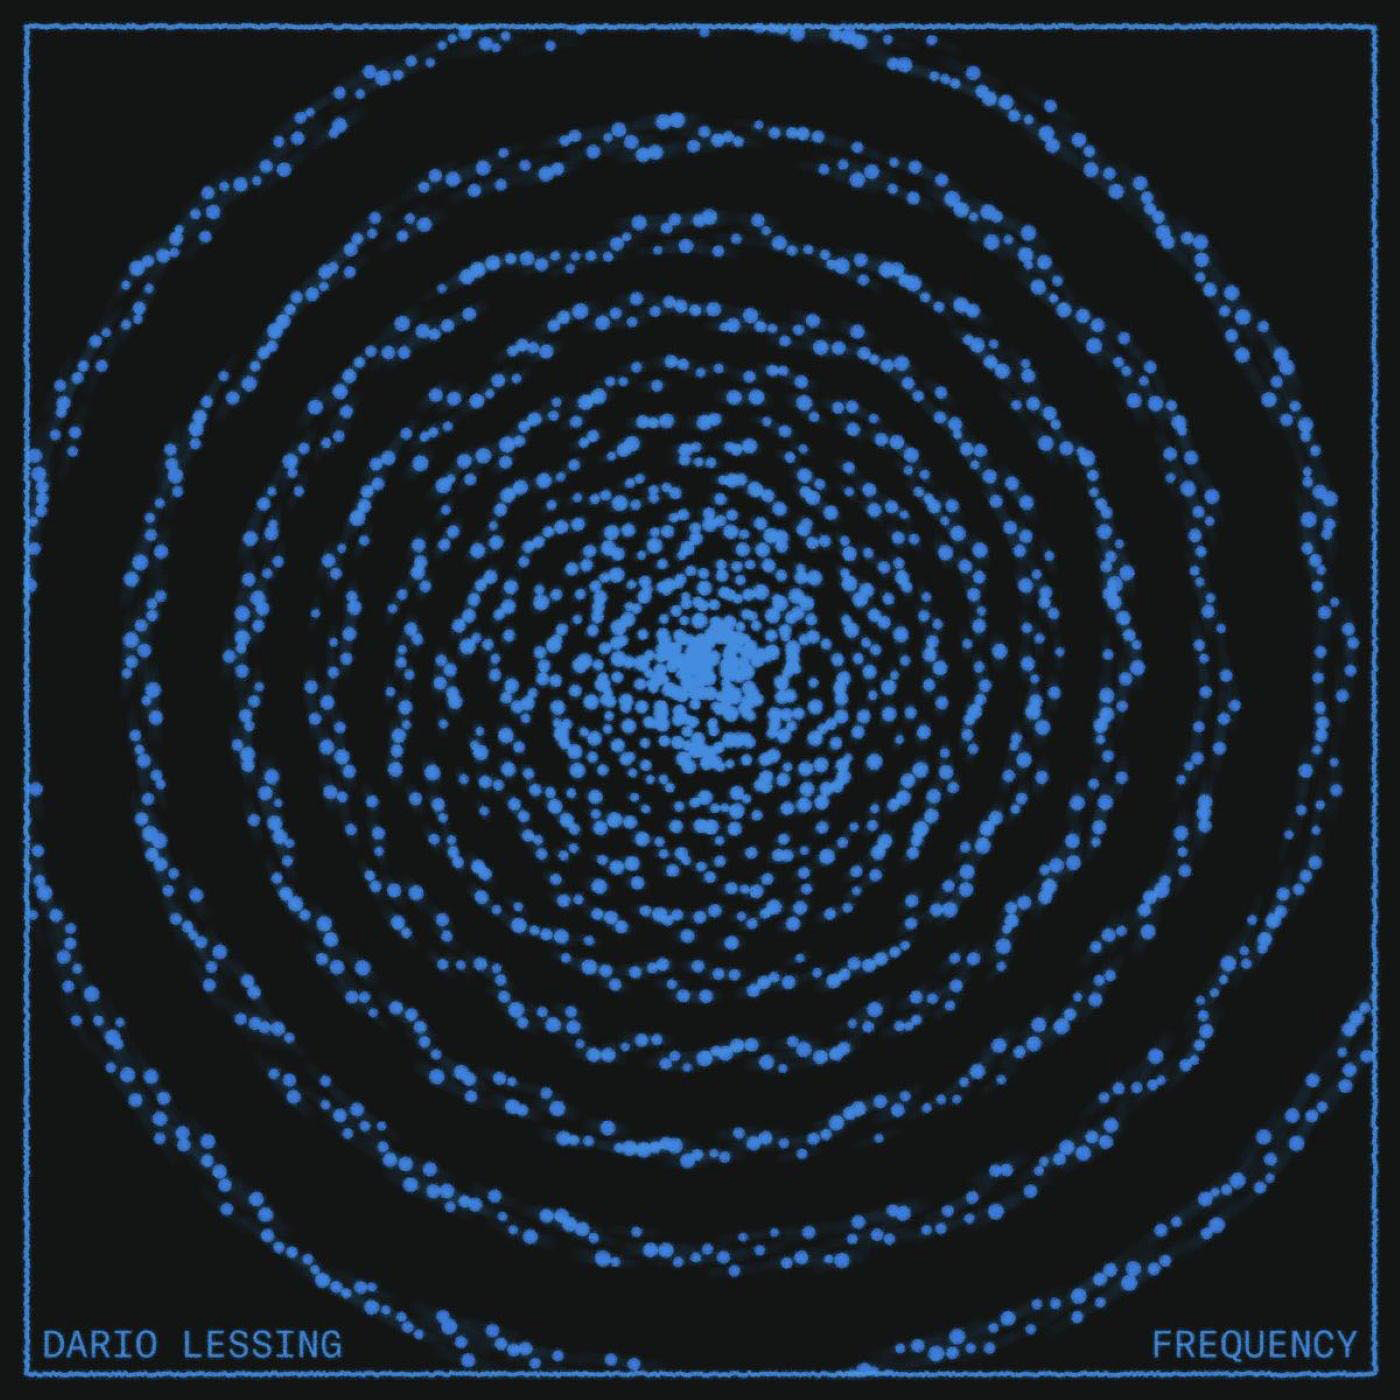 Dario Lessing (CD) - - Frequency